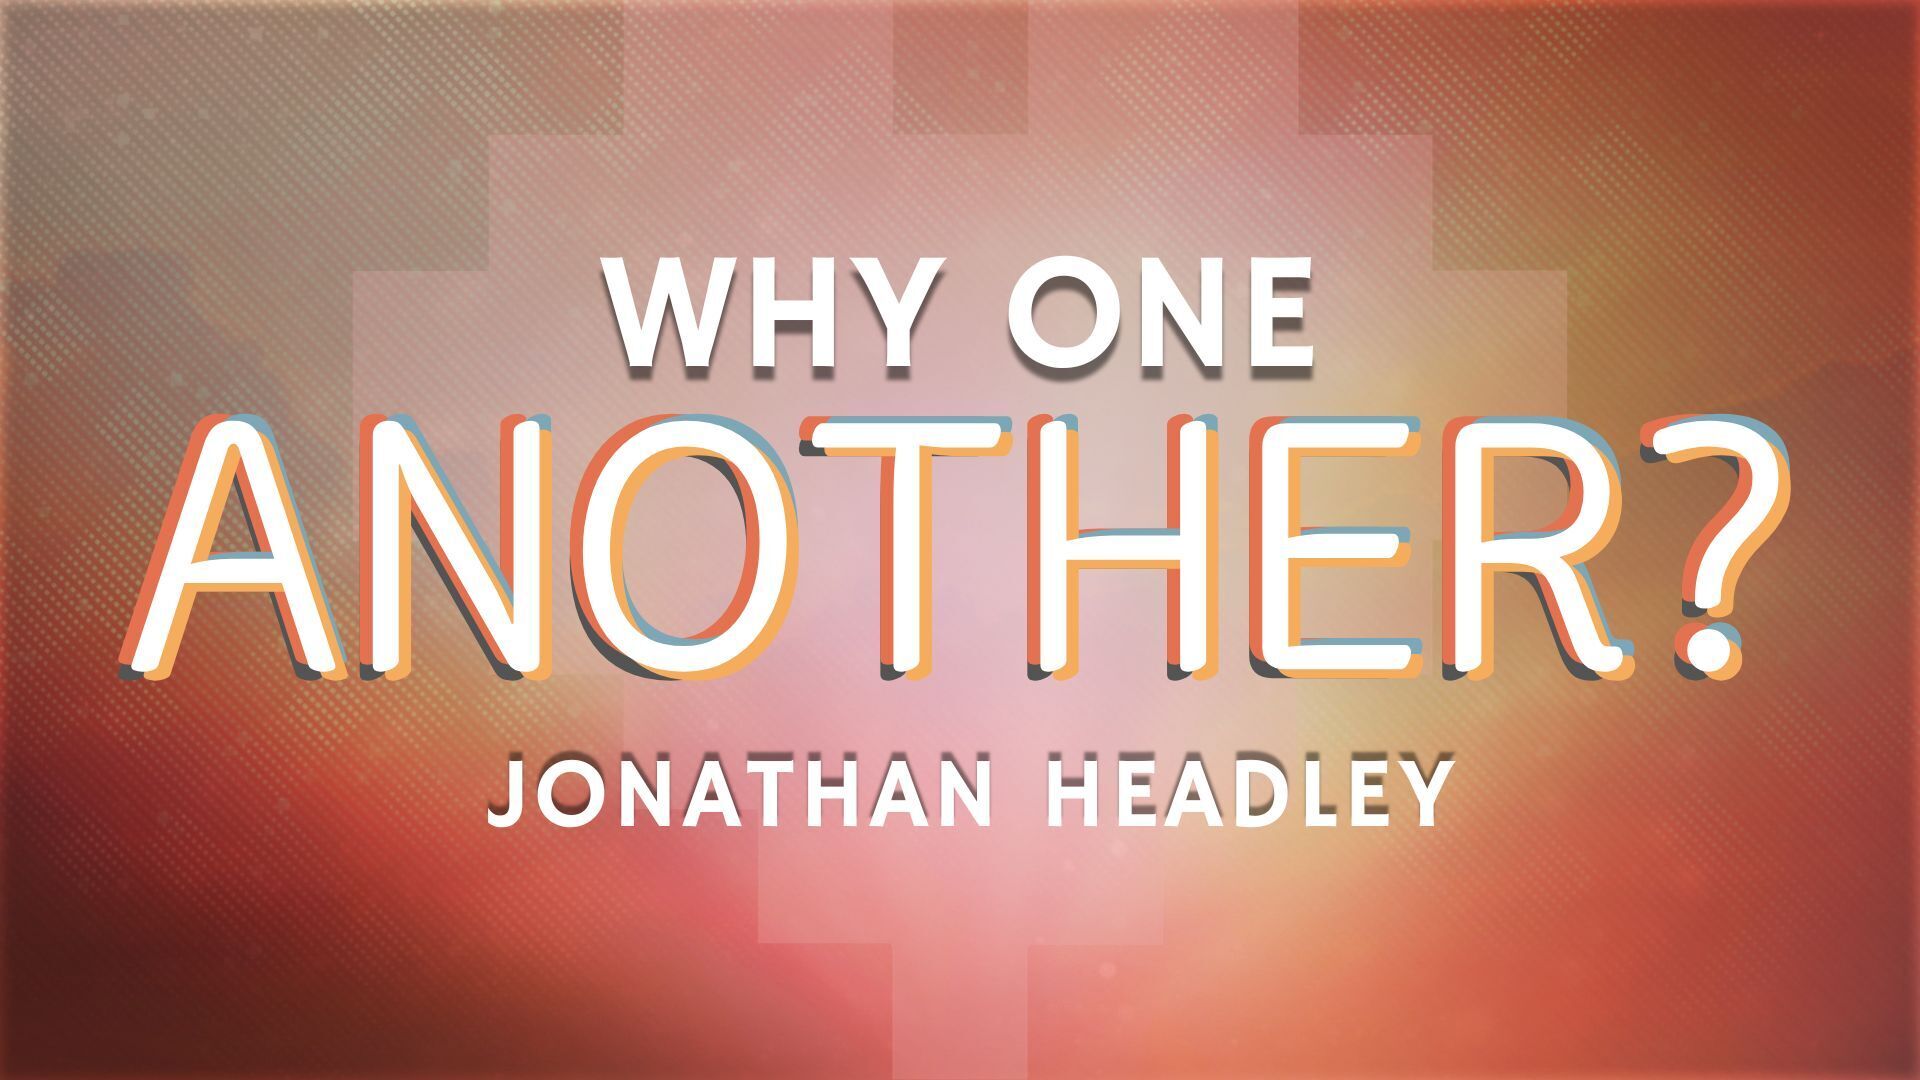 Preview of One Another - Why One Another?